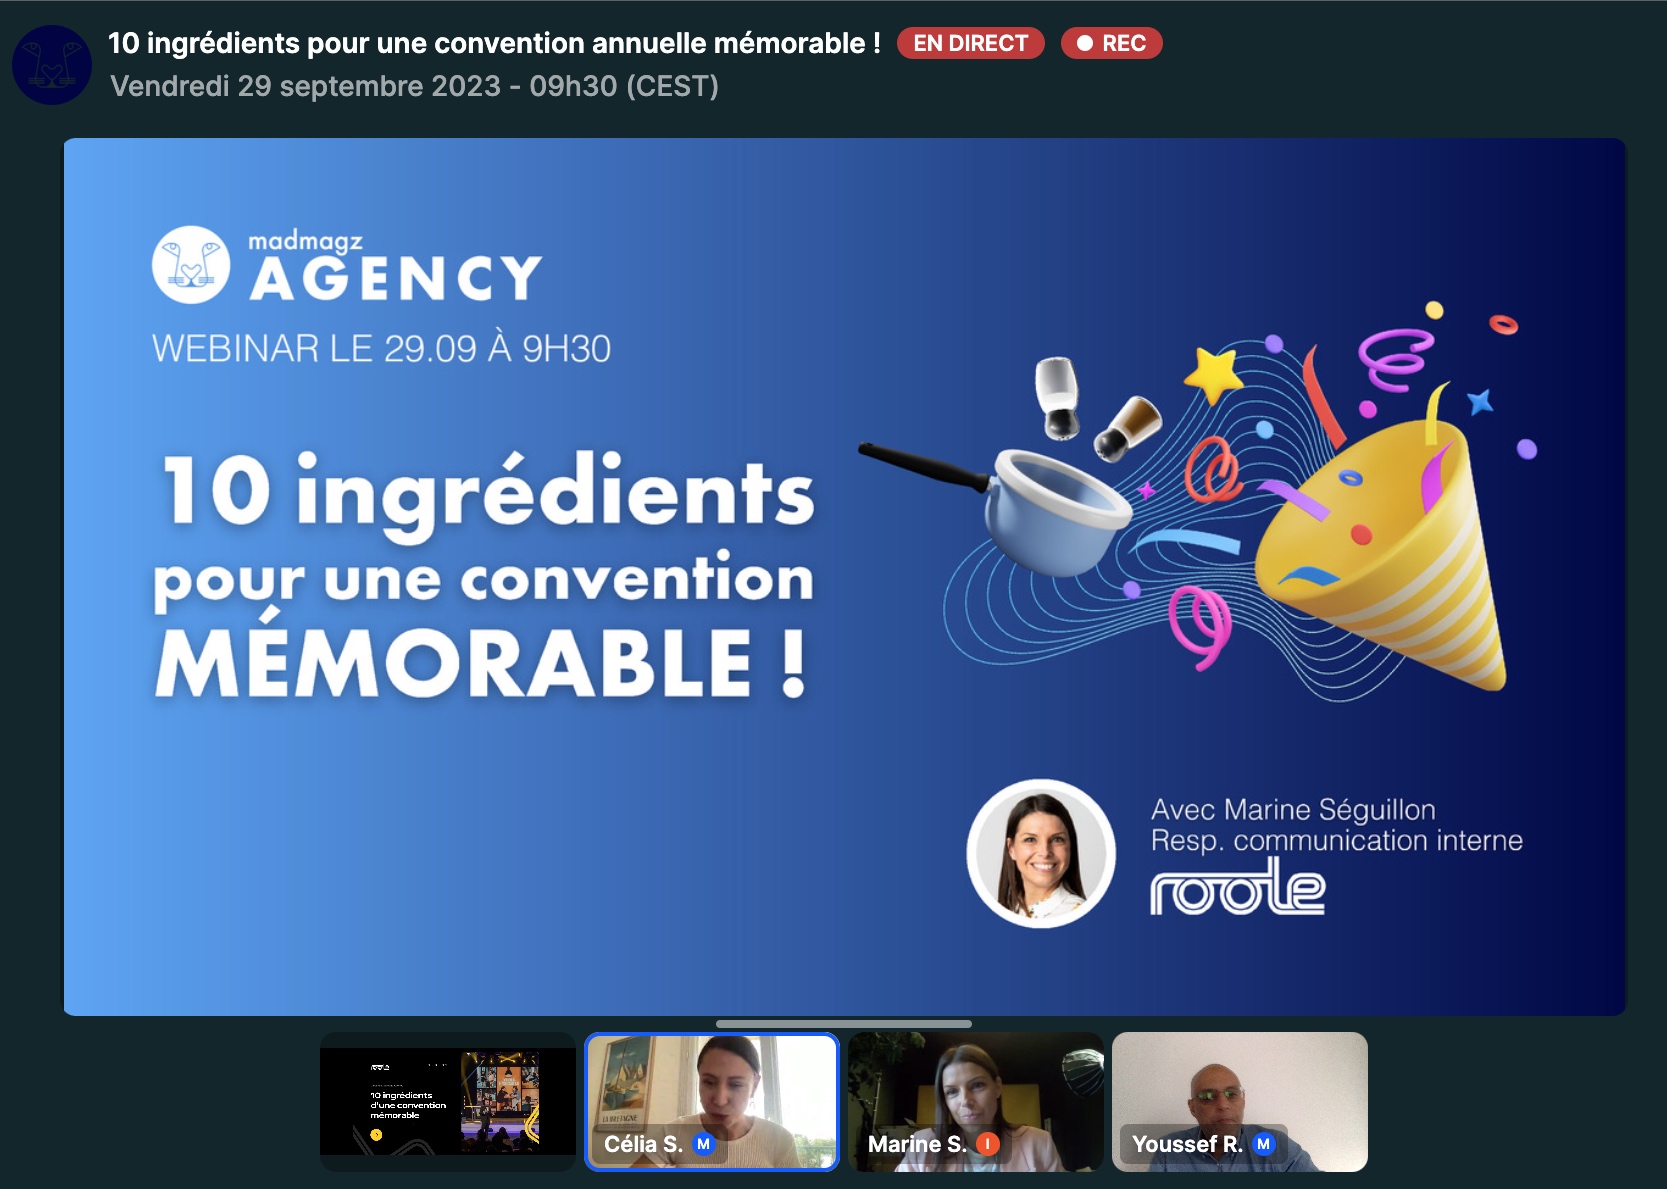 webinaire madmagz agency convention annuelle